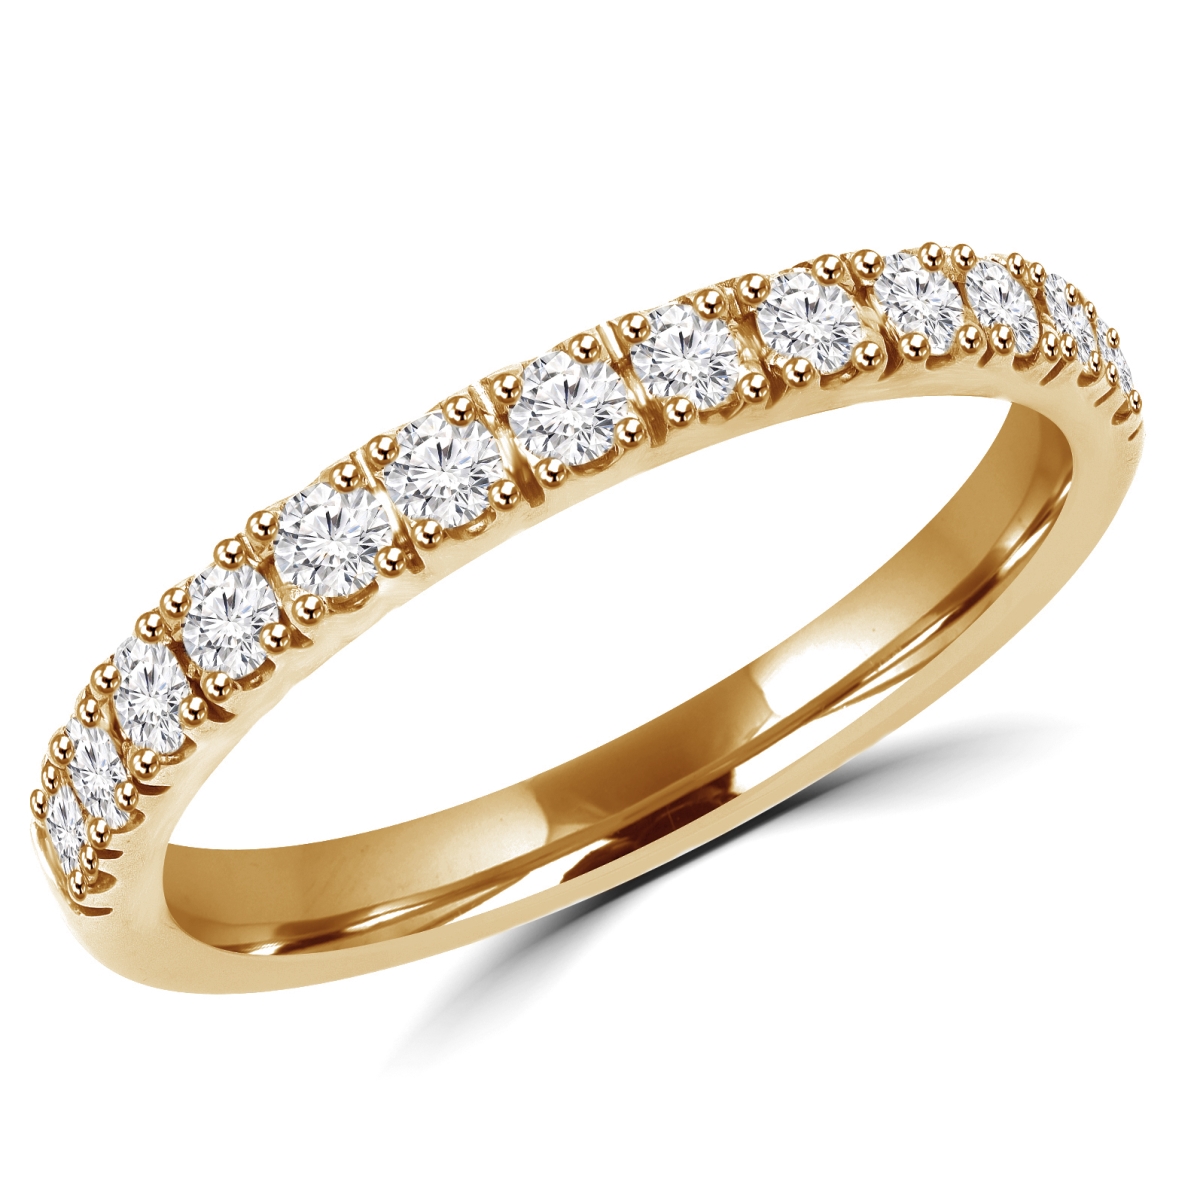 Picture of Majesty Diamonds MD180187-5.25 0.3 CTW Round Diamond Semi-Eternity Wedding Band Ring in 14K Yellow Gold - Size 5.25